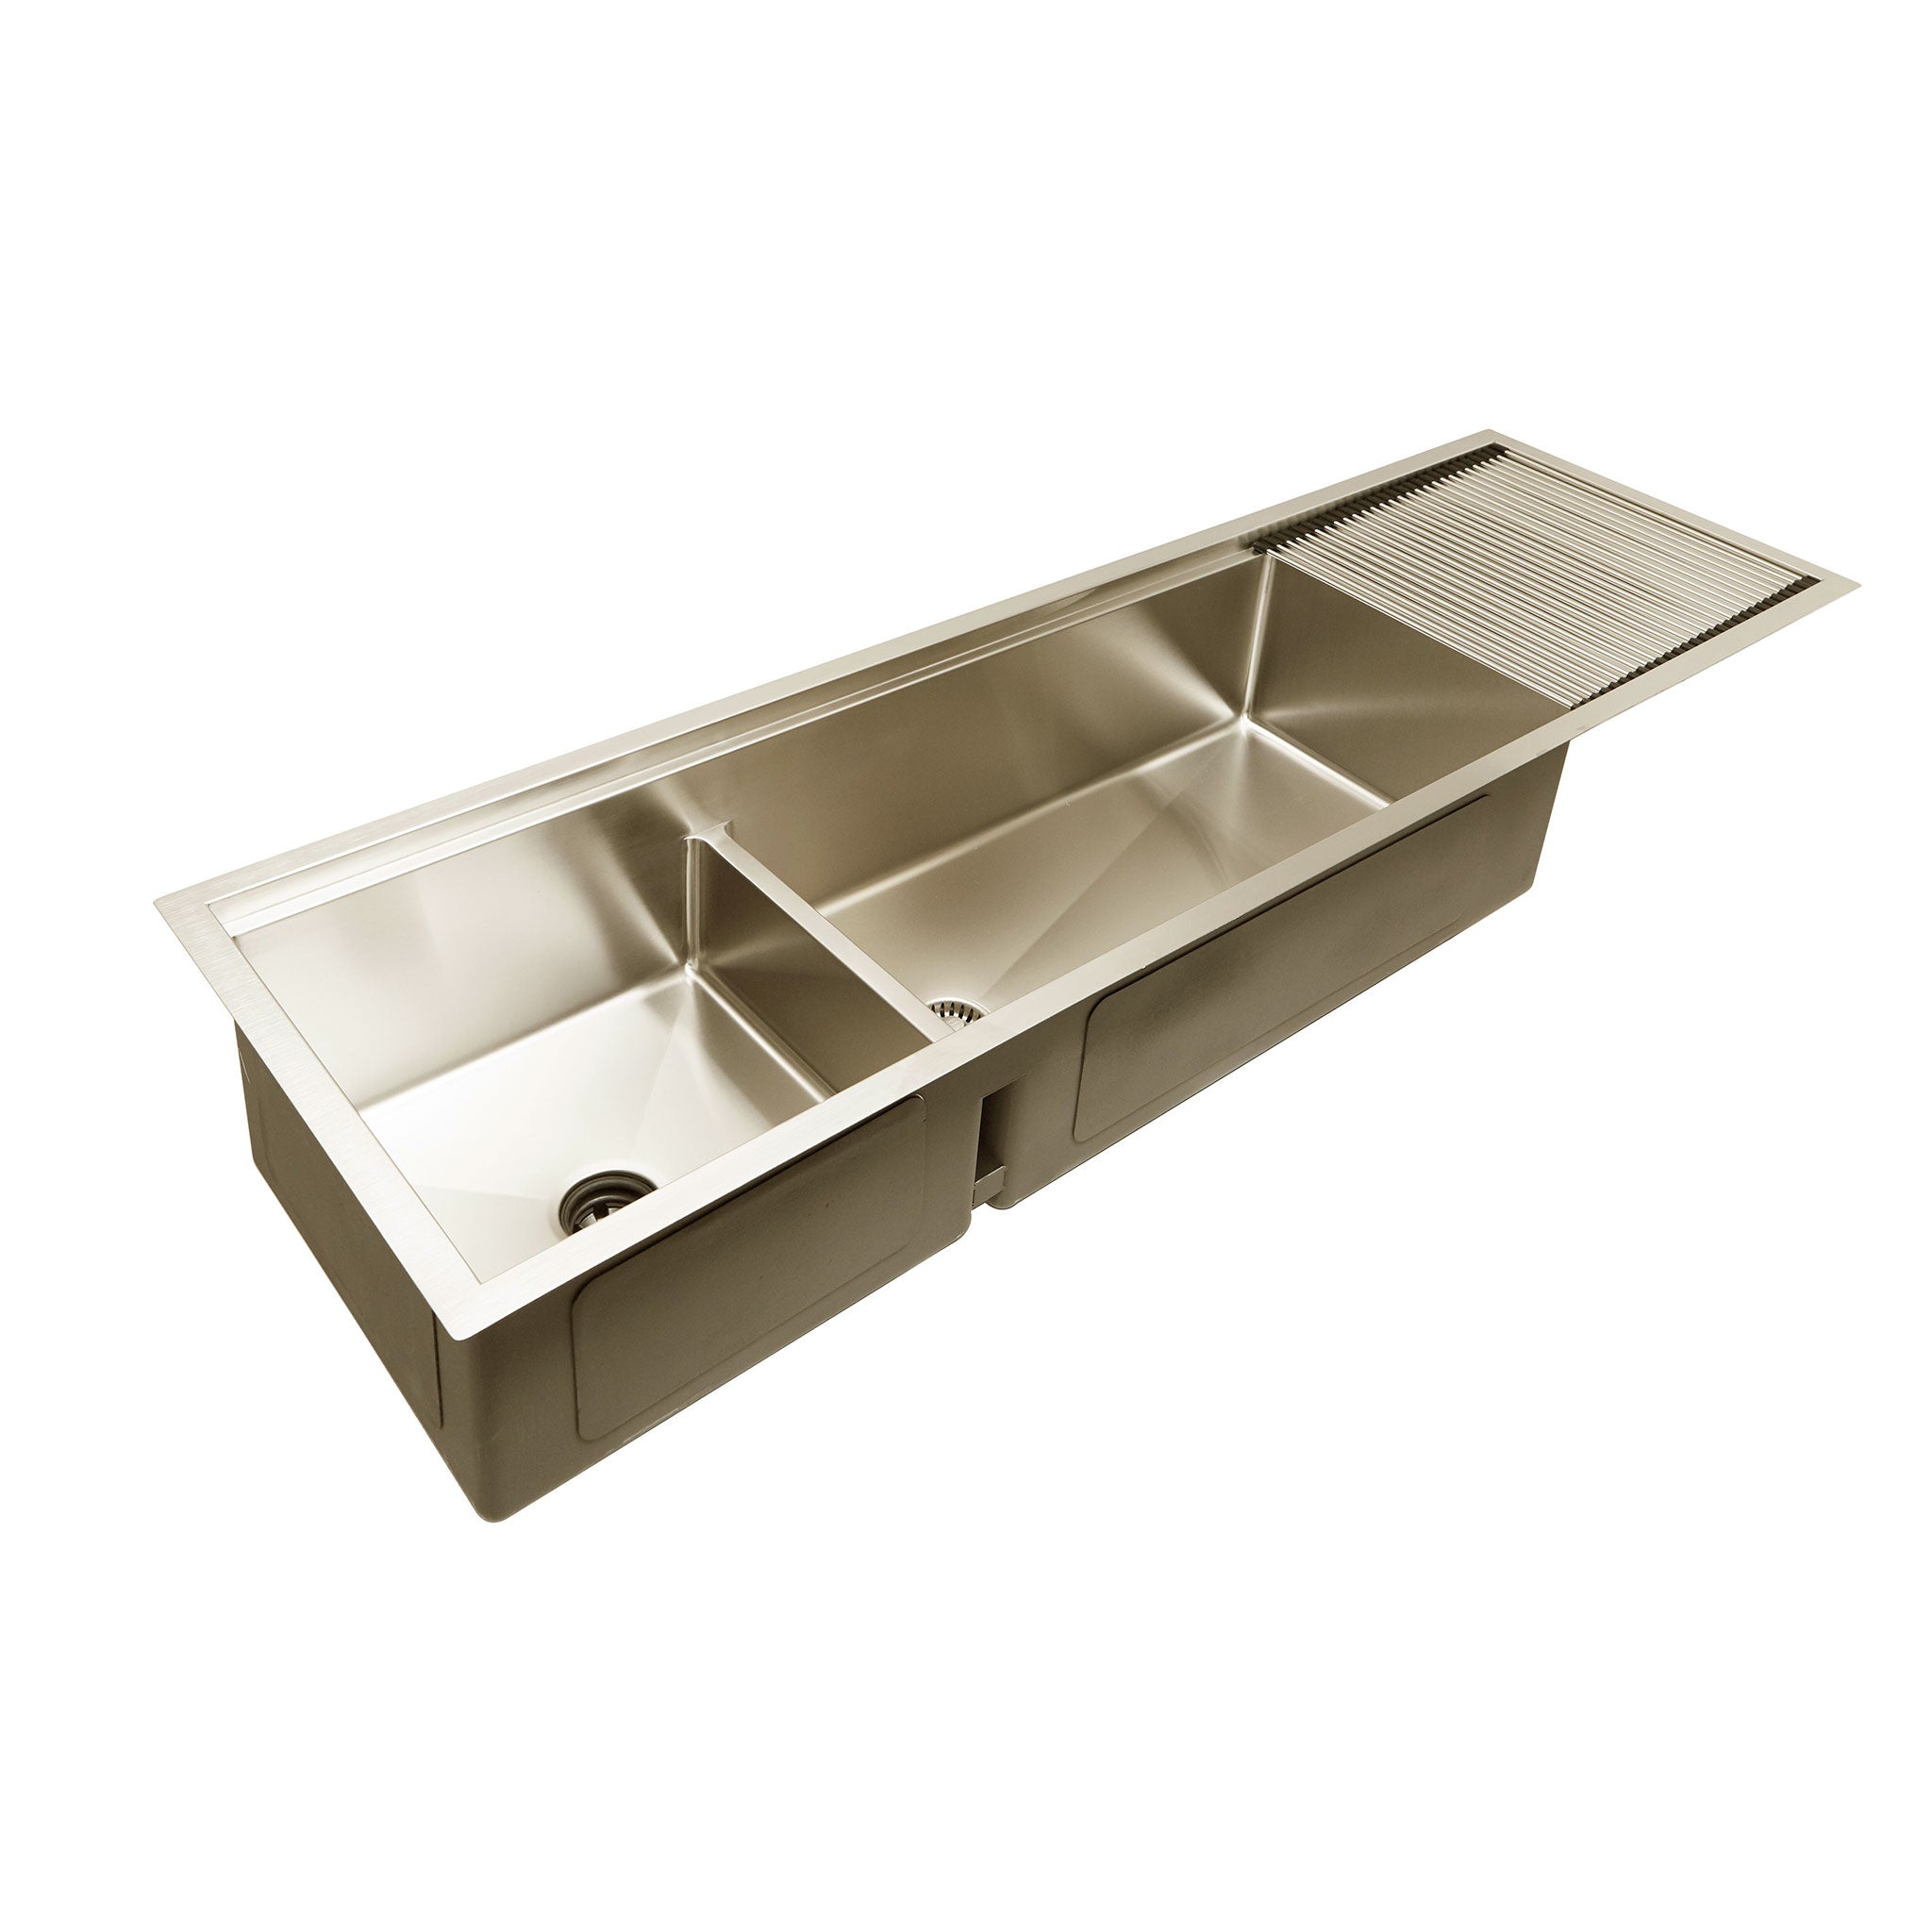 Dual basin workstation kitchen sink with stainless steel drainboard 68 inches in width